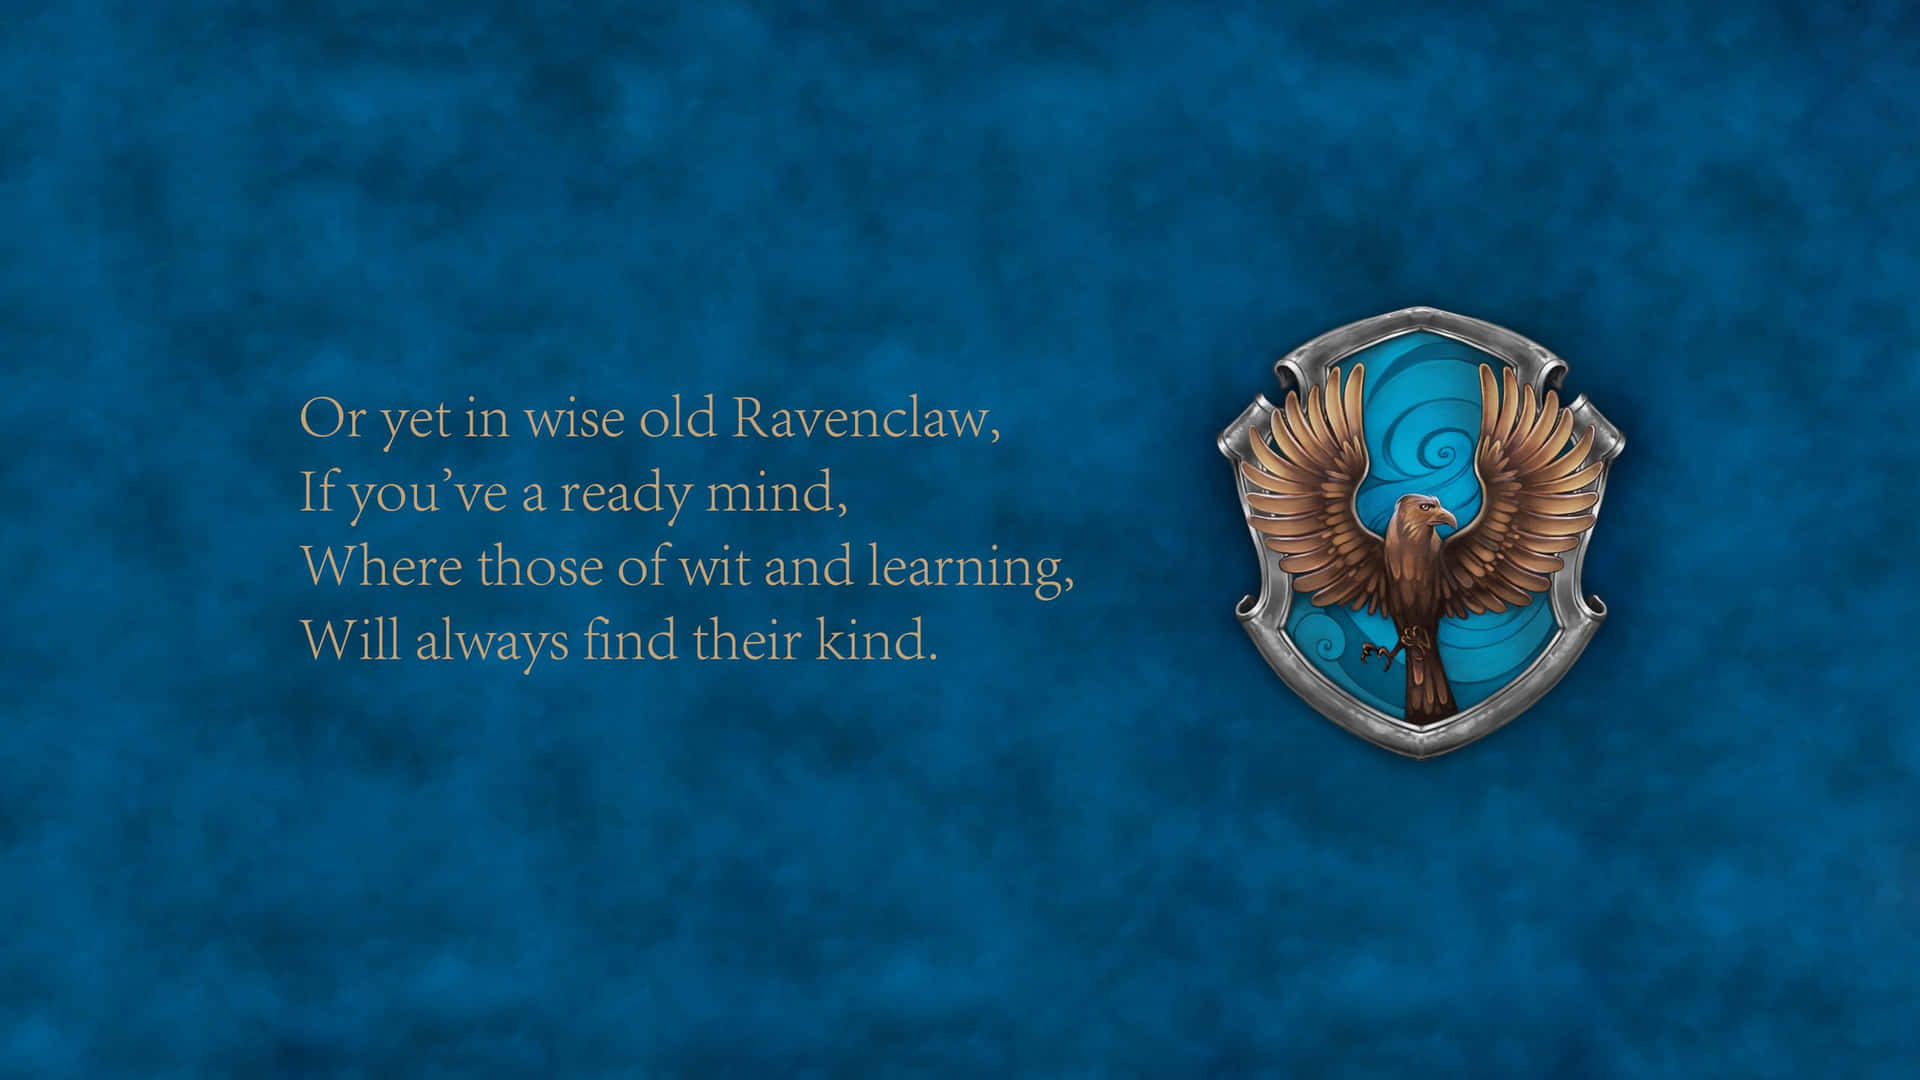 "I'd rather be intelligent than be led by my emotions" - Ravenclaw